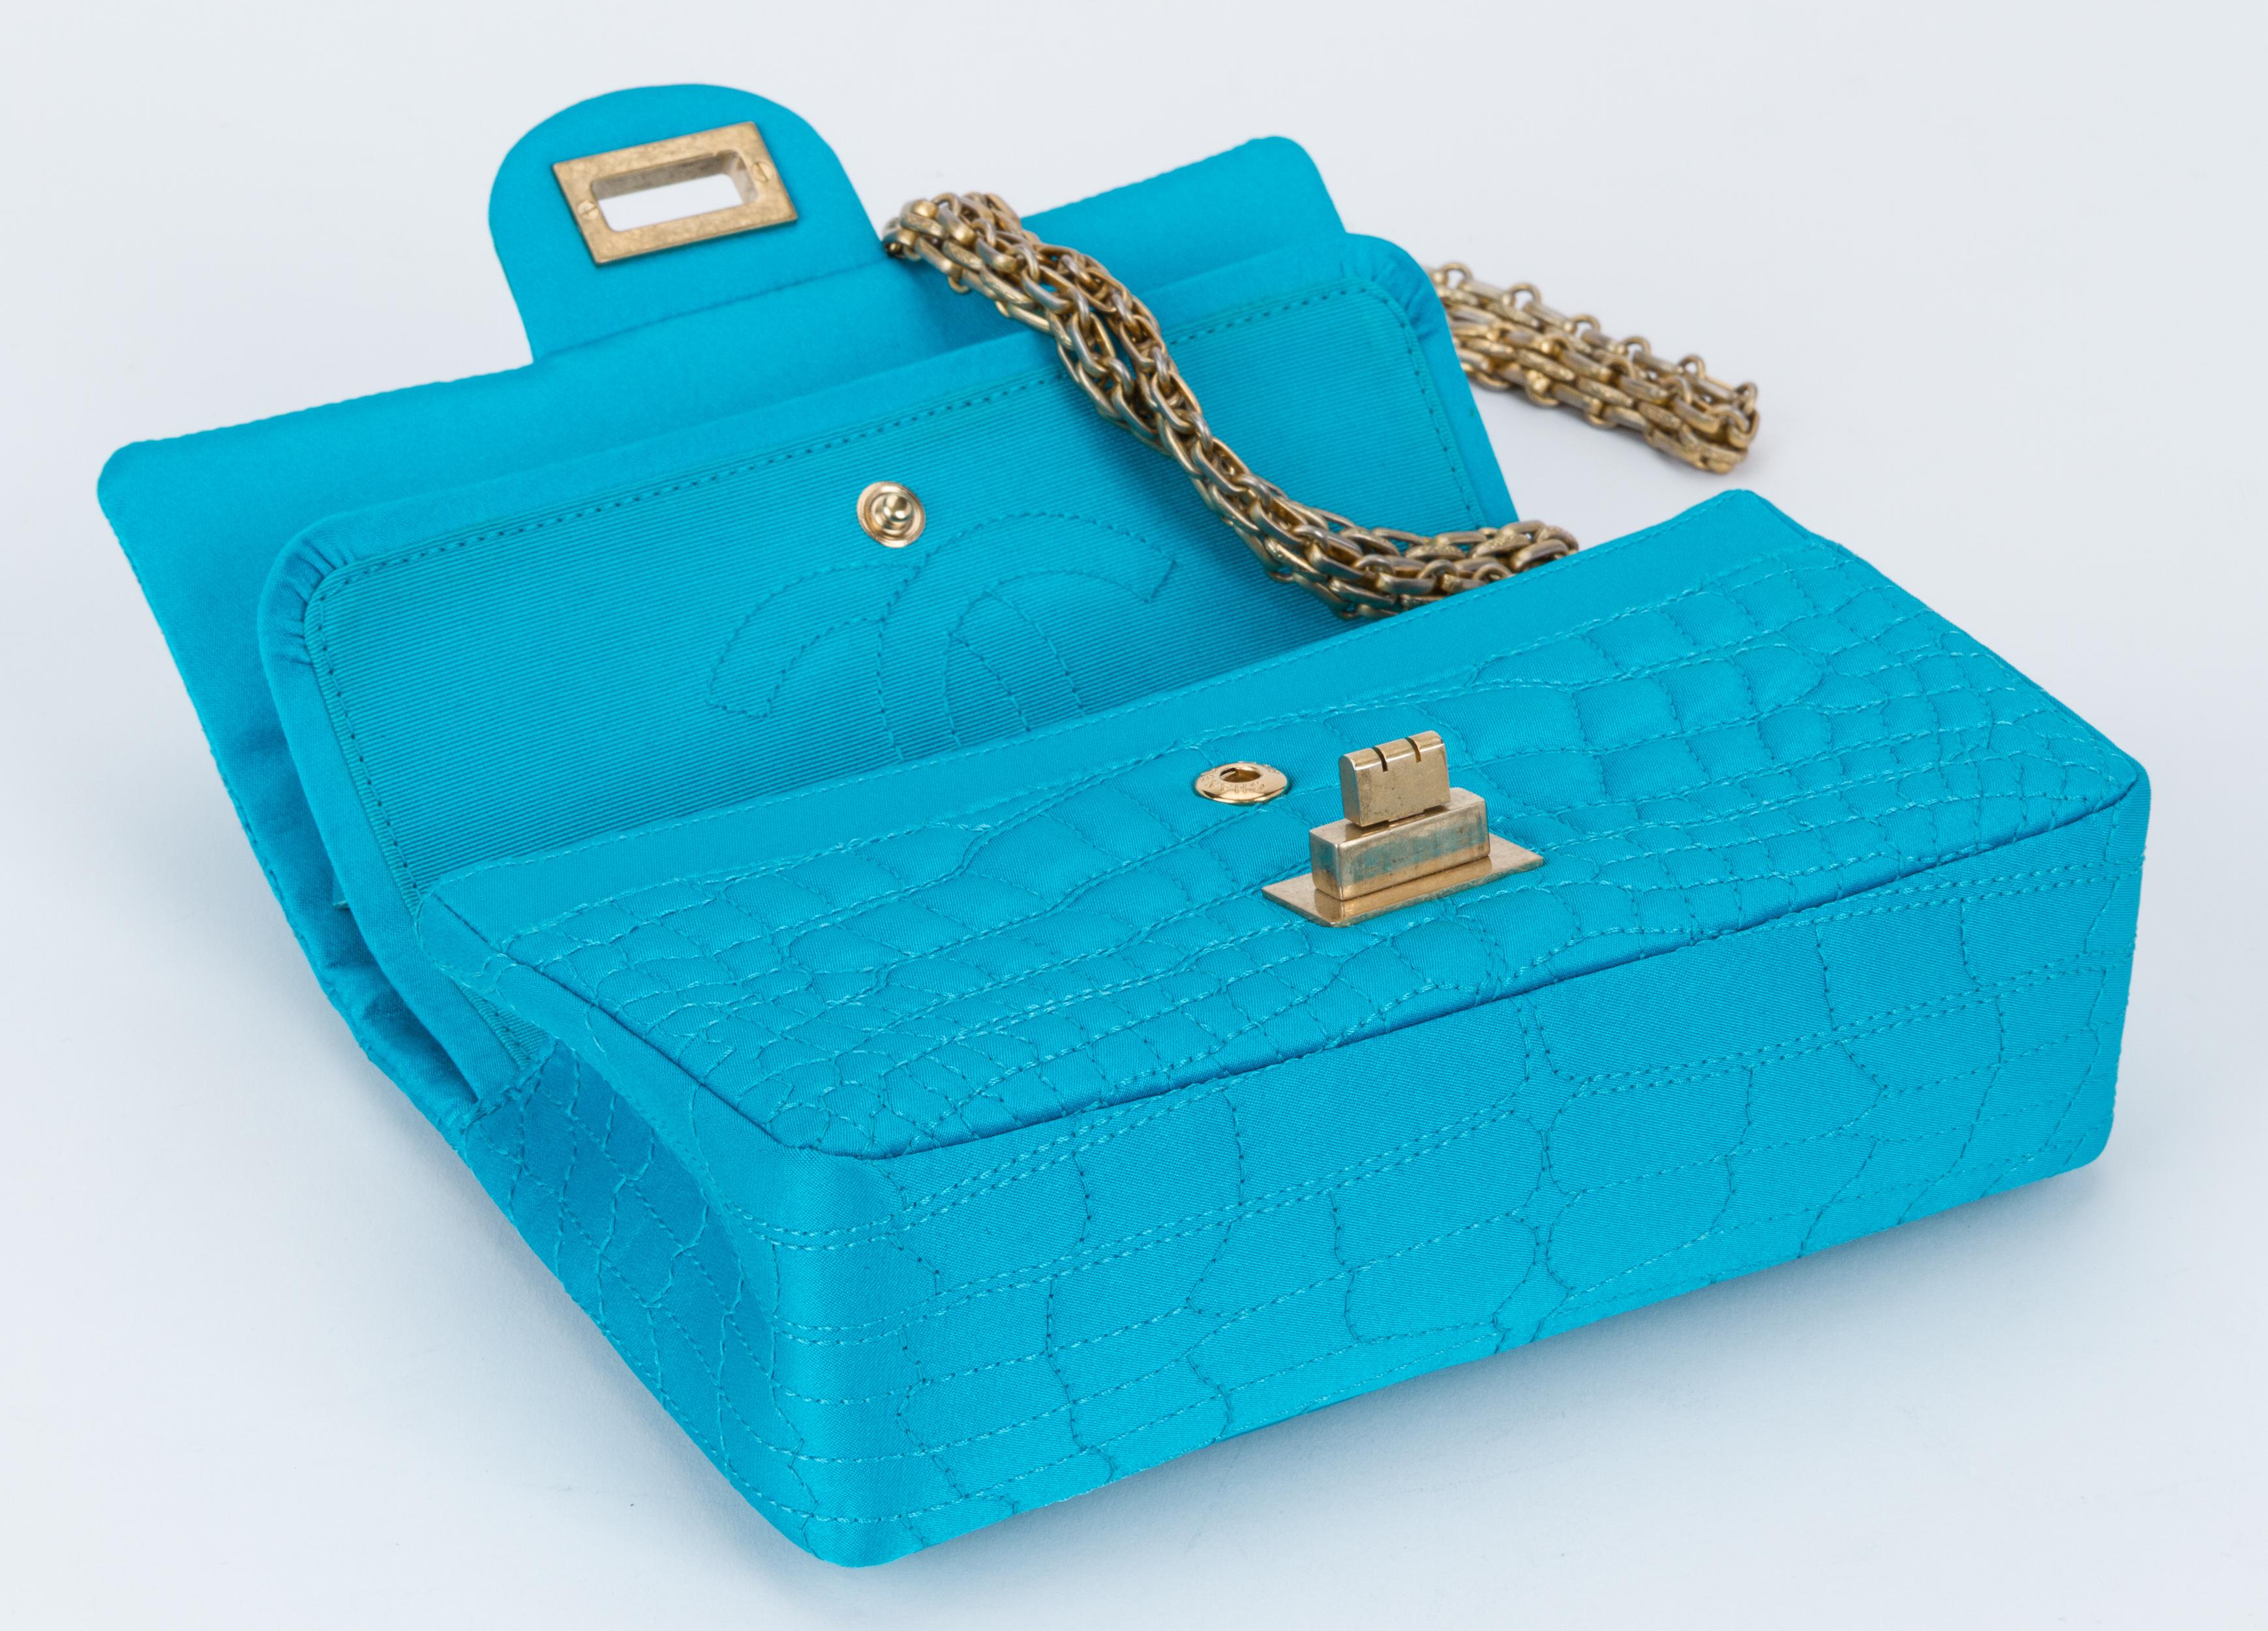 Chanel Silk Croc Embossed Turquoise Flap Bag 8